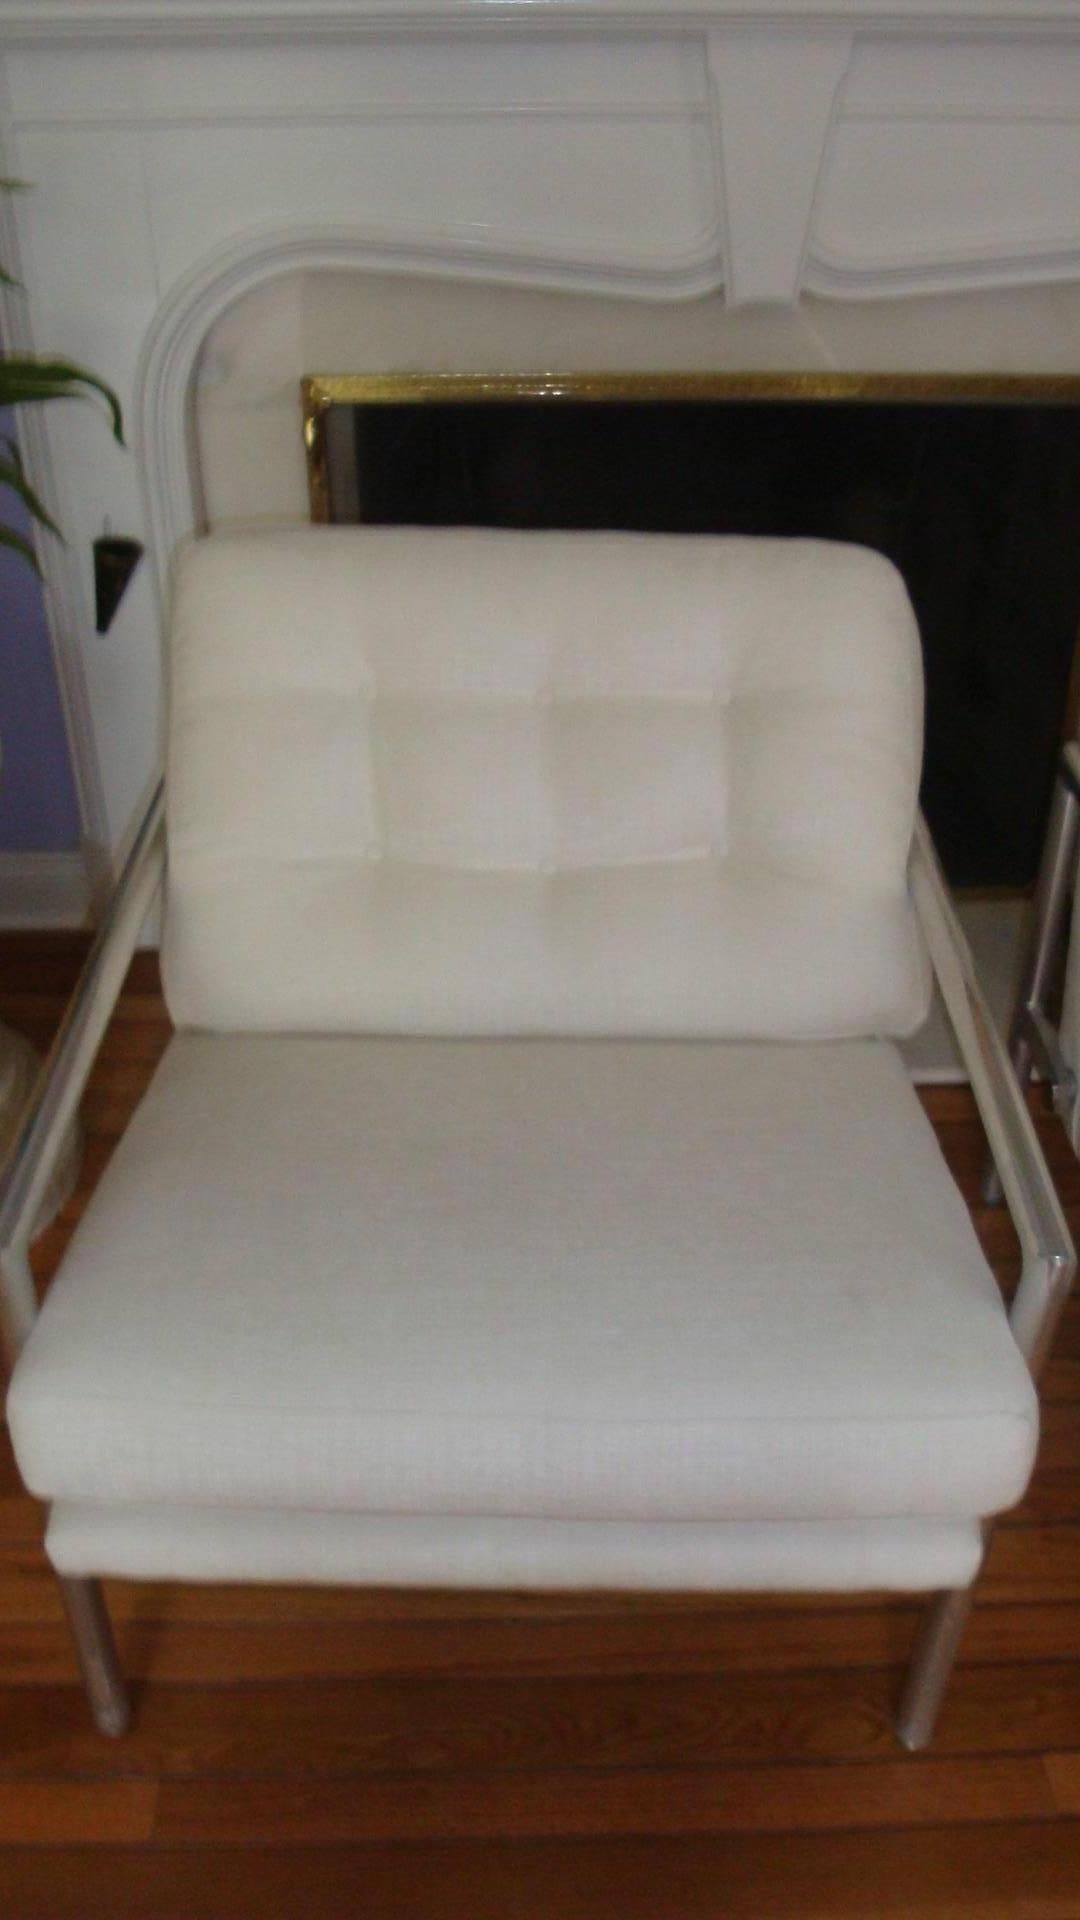 These are a pair of vintage Milo Baughman style armchairs that have been newly upholstered in a white chenille fabric.